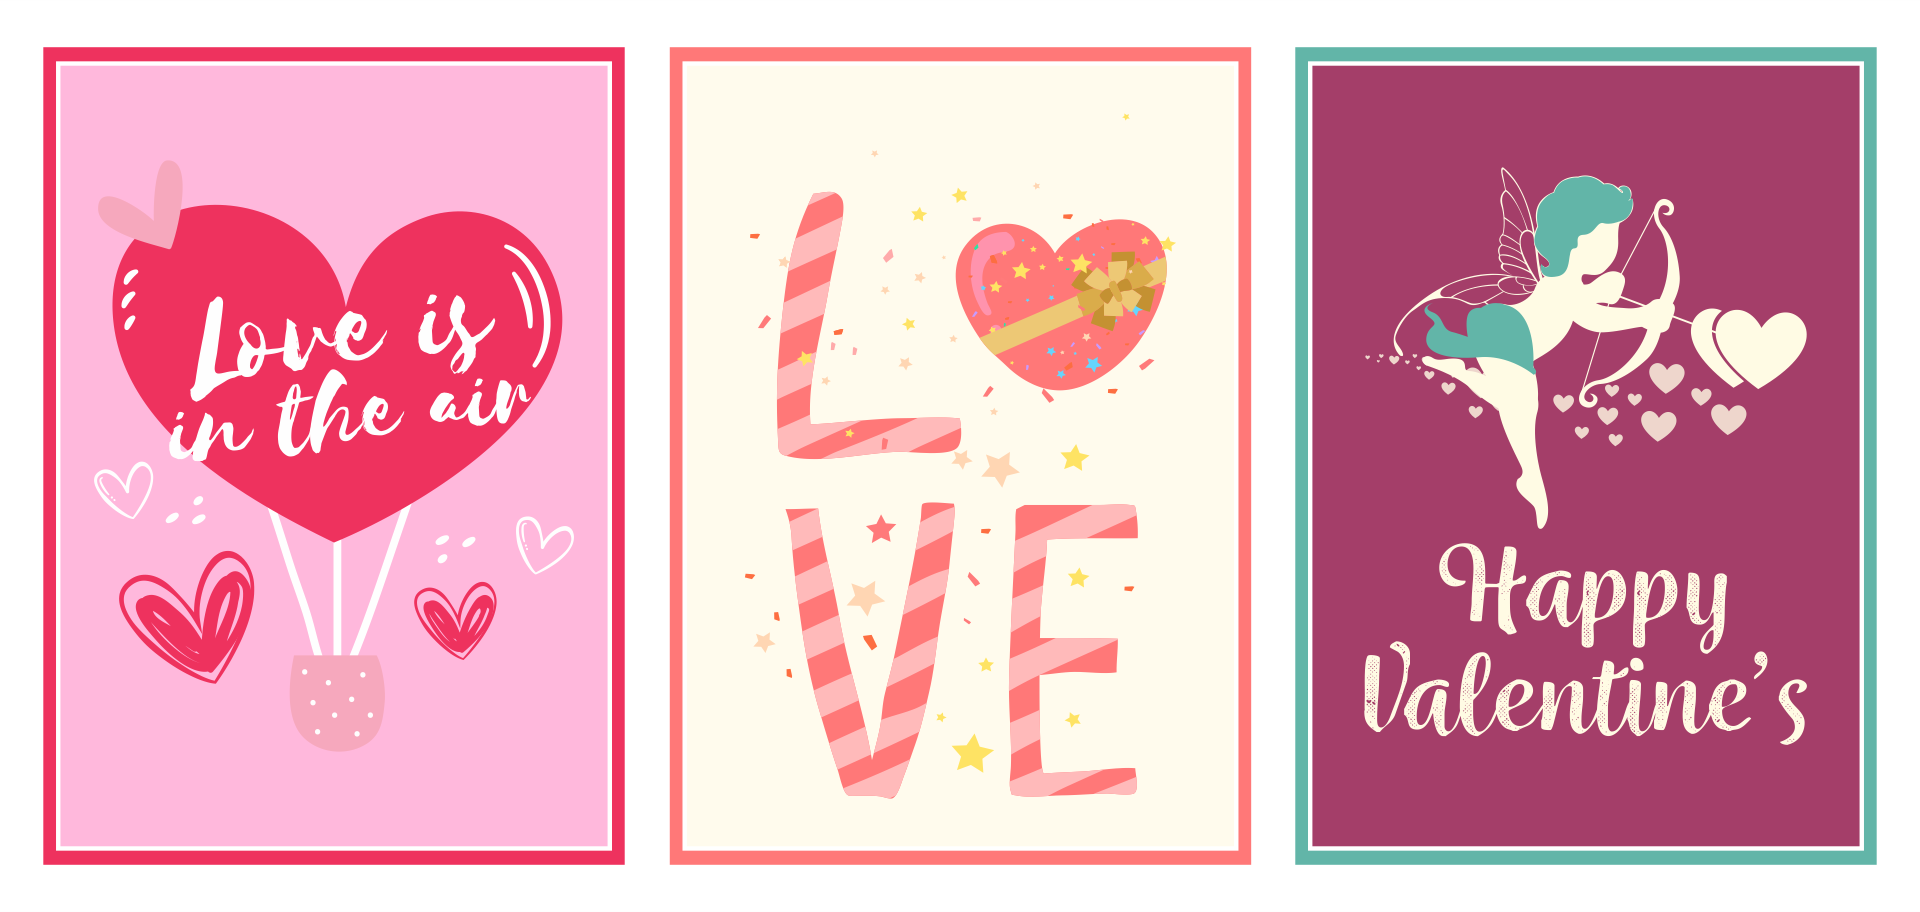 20 Best My Valentine Free Printable Cards - printablee.com Pertaining To Valentine Card Template For Kids